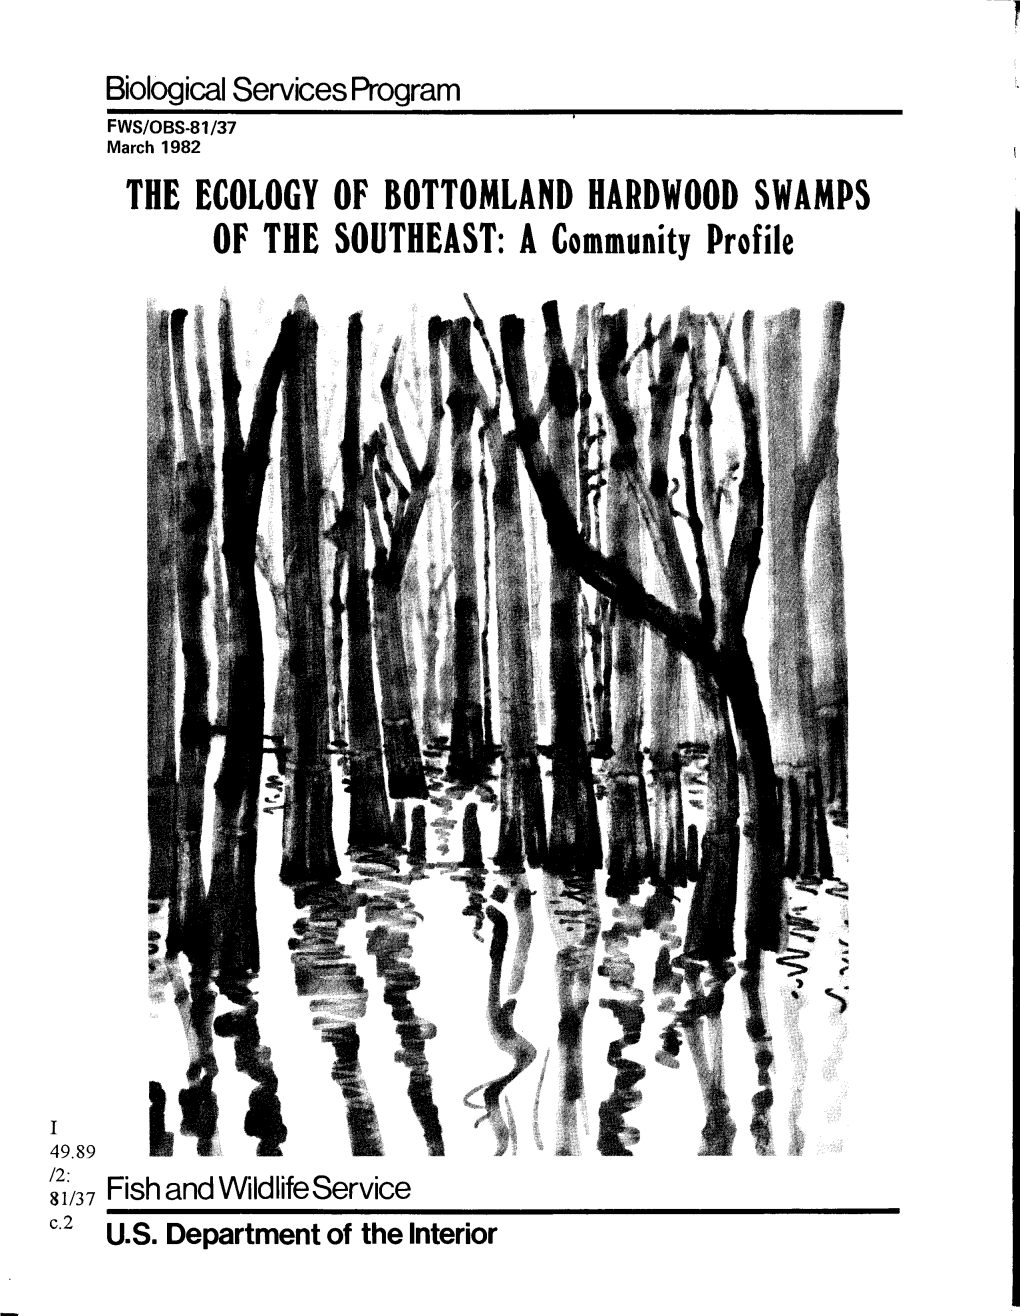 THE ECOLOGY of BOTTOMLAND HARDWOOD SWAMPS of the SOUTHEAST: a Community Profile